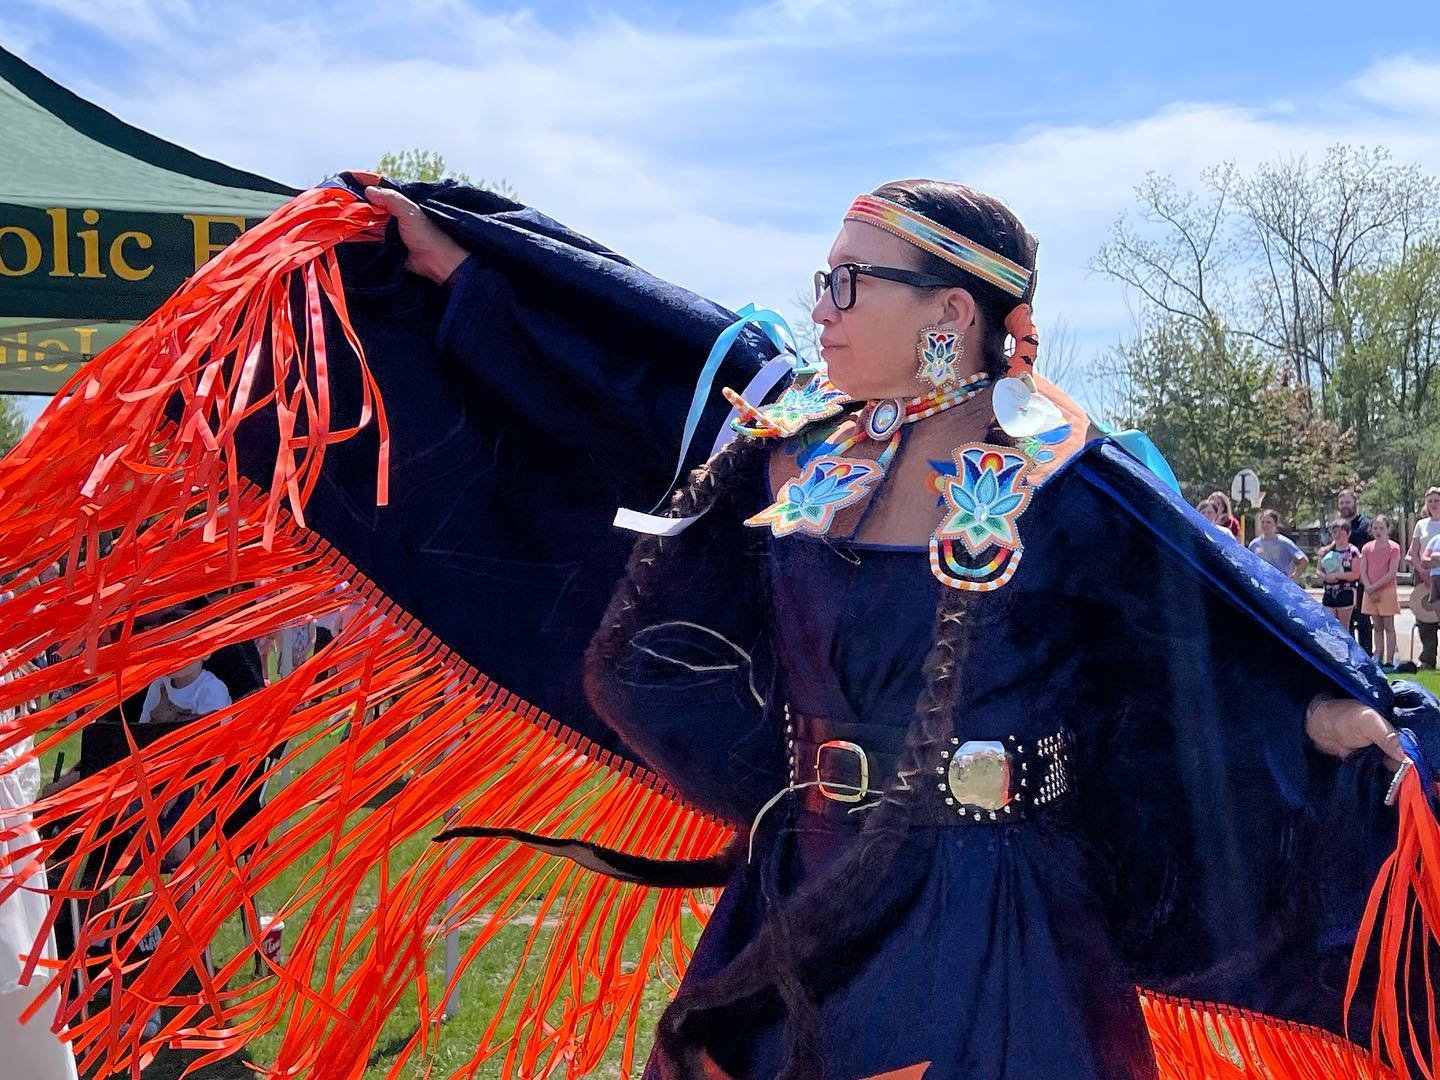 Kelli Marshall of Hiawatha First Nation (pictured) dances in a fancy shawl at a pow wow at St. John Catholic Elementary School. All photos by David Tuan Bui.